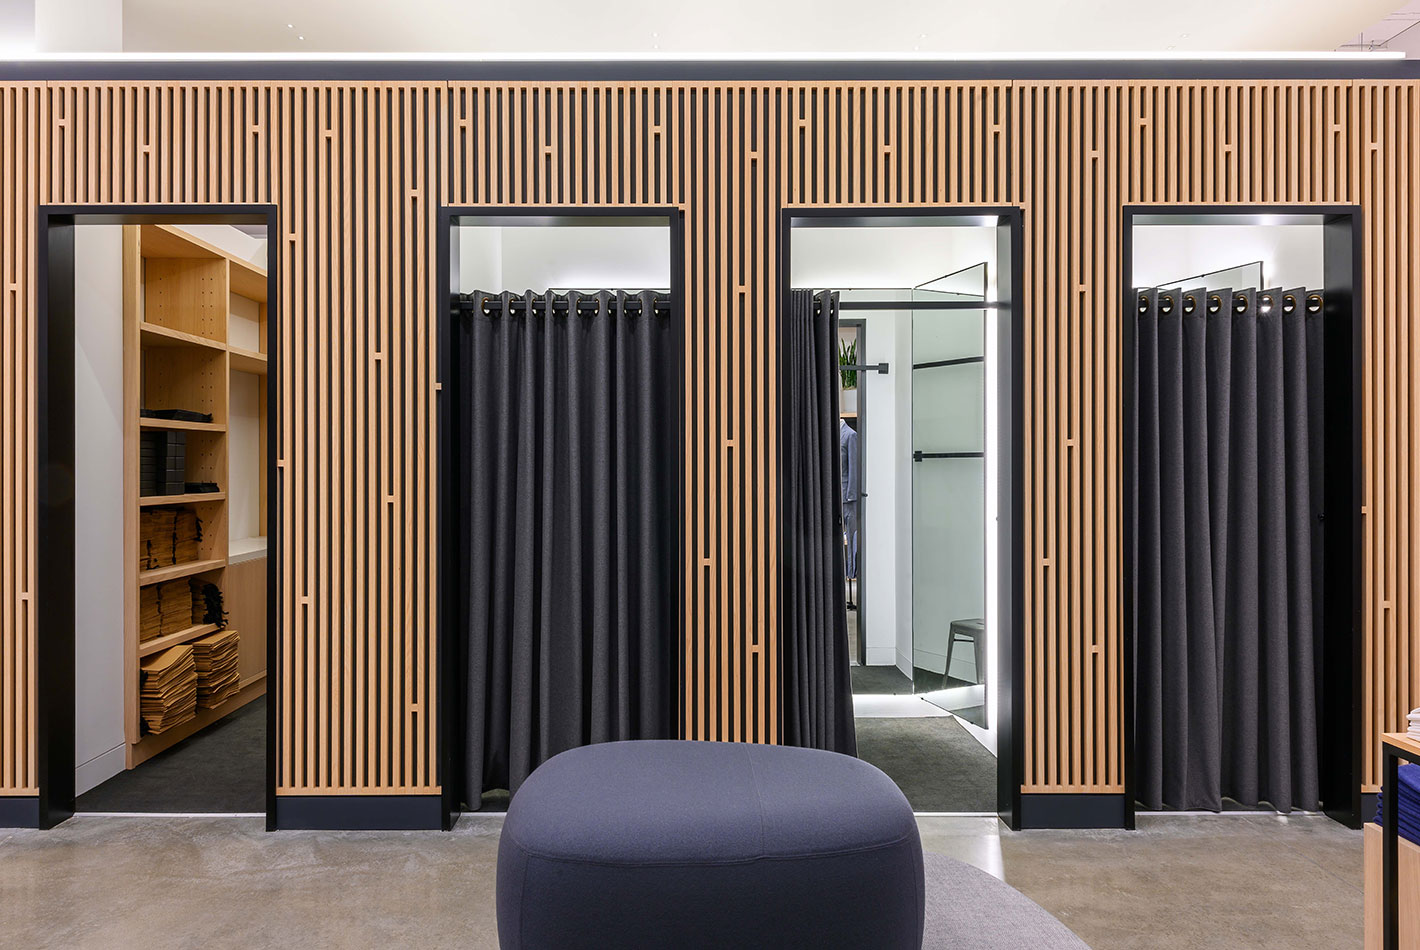 Gray flannel curtain panels cover the dressing rooms at J Crew's newly designed store. Slatted-wood walls separate the spaces.